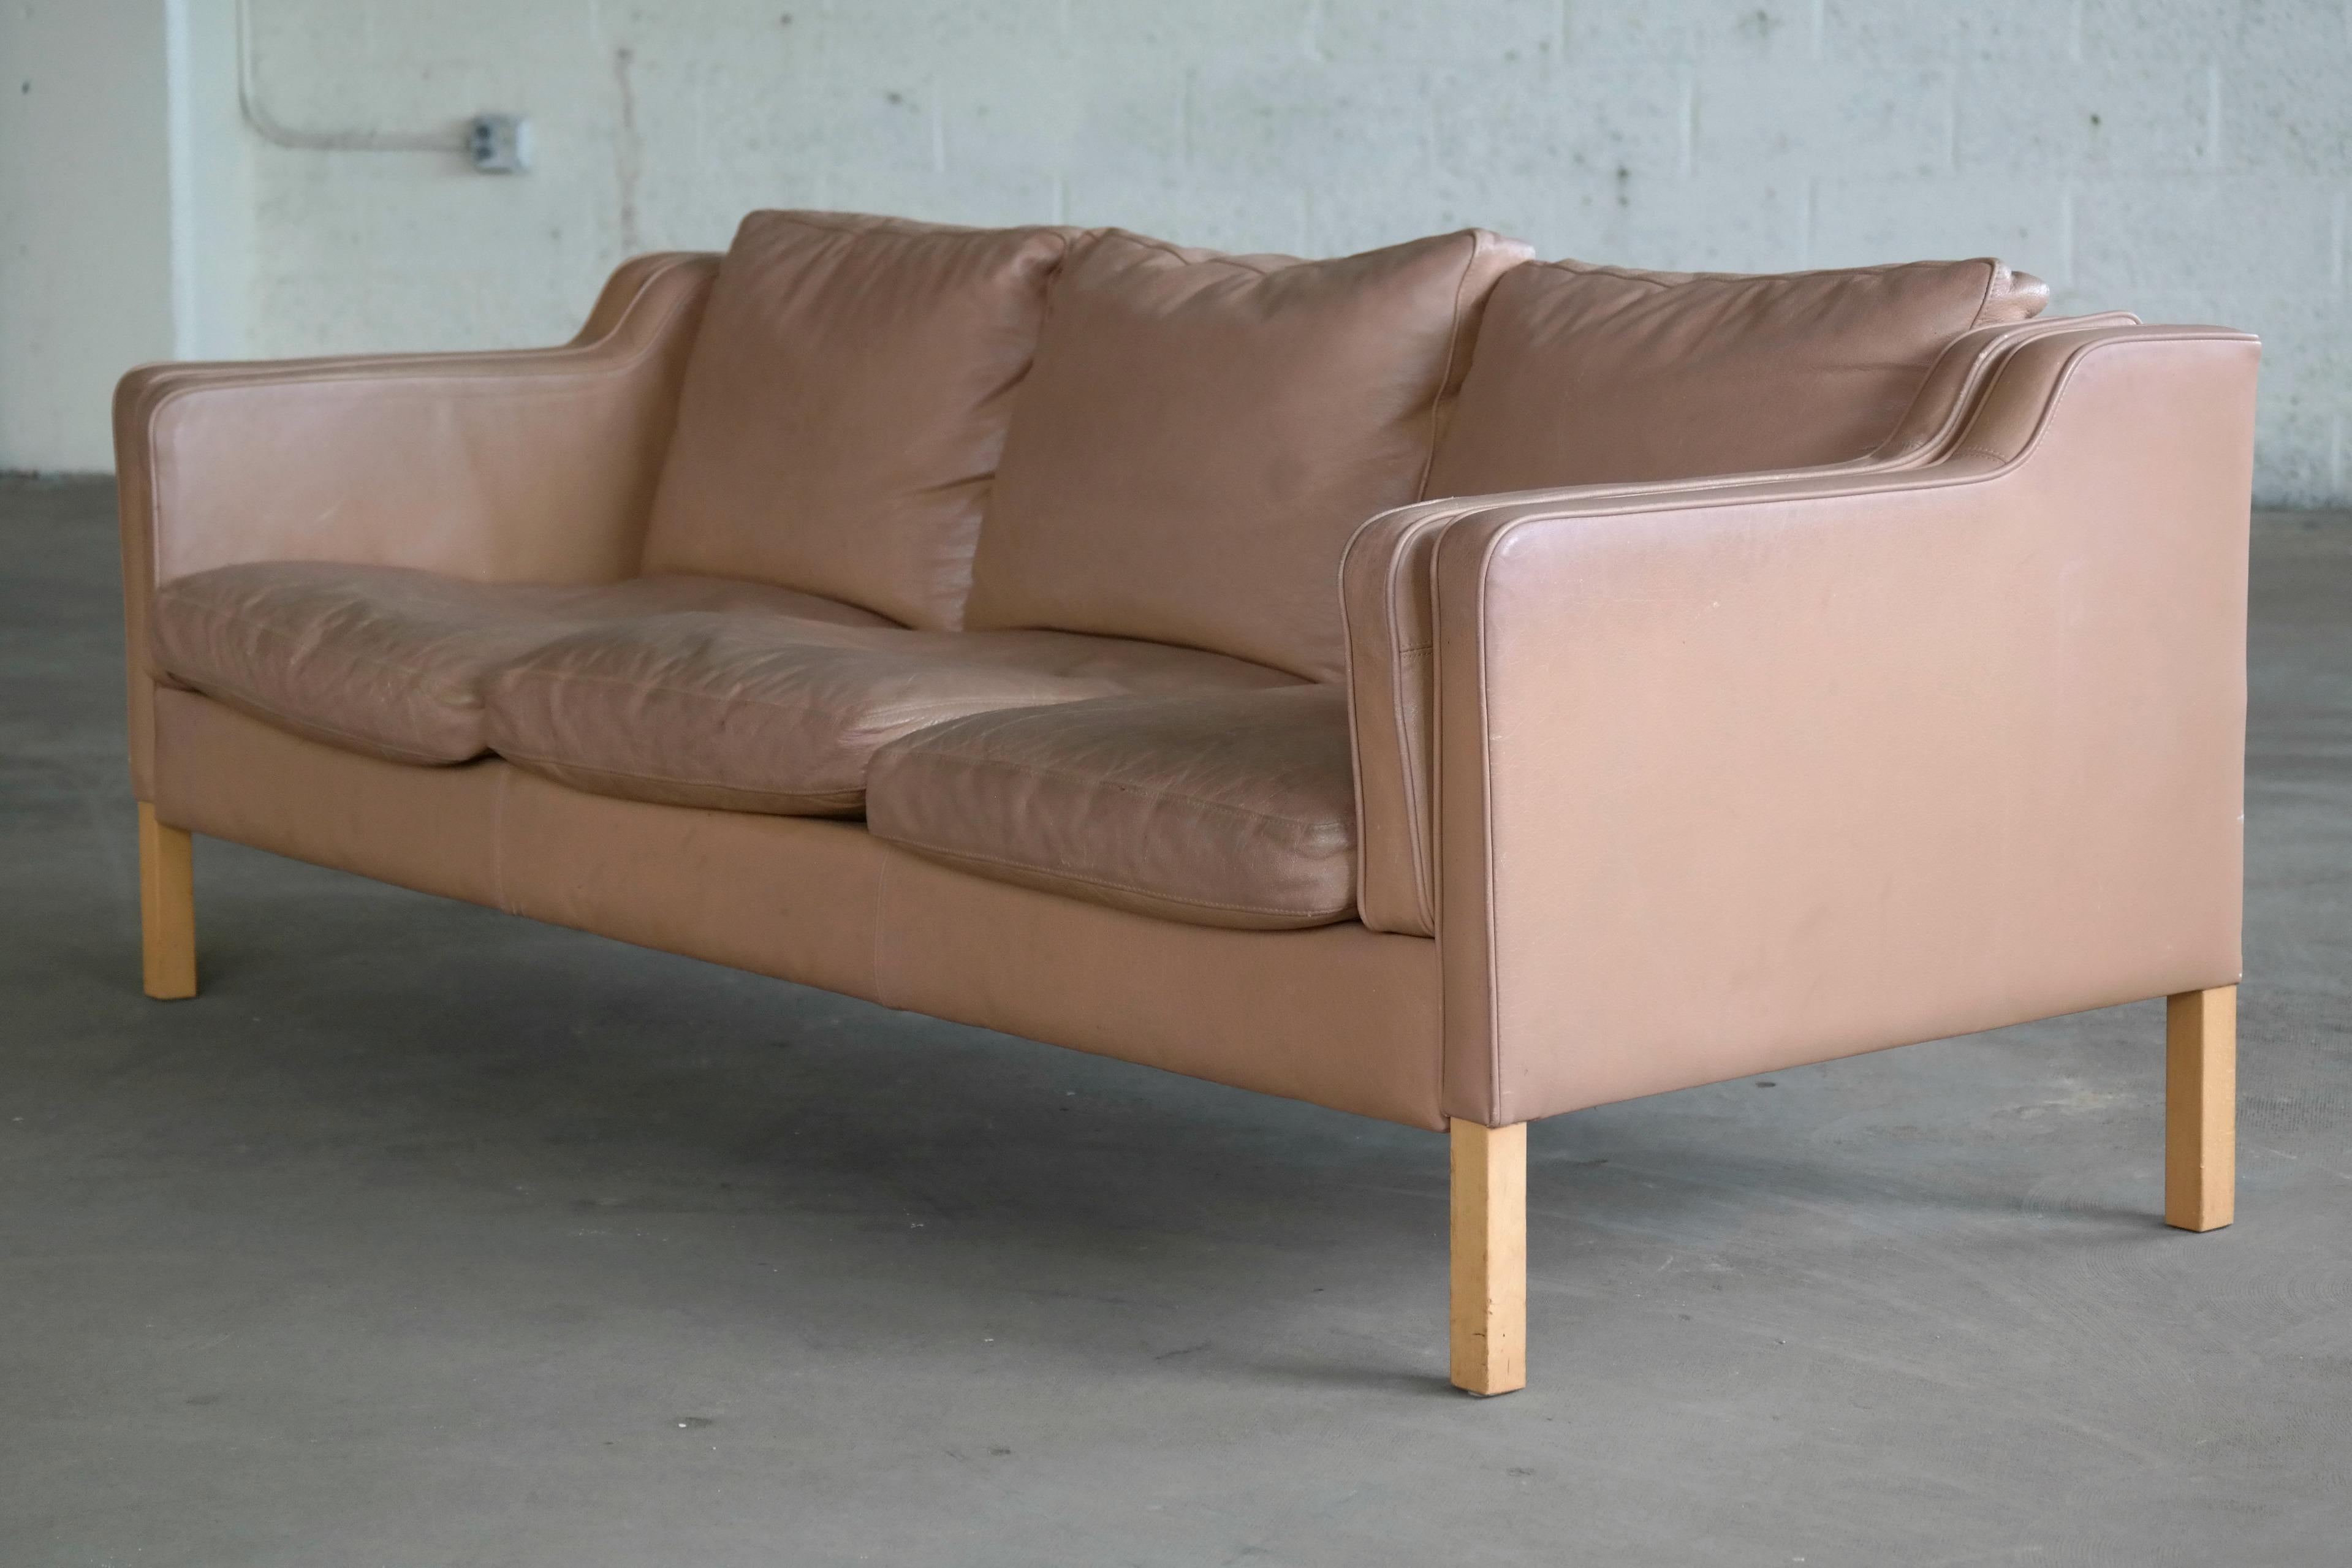 Late 20th Century Classic Danish Midcentury Sofa in Tan Leather in the Style of Børge Mogensen